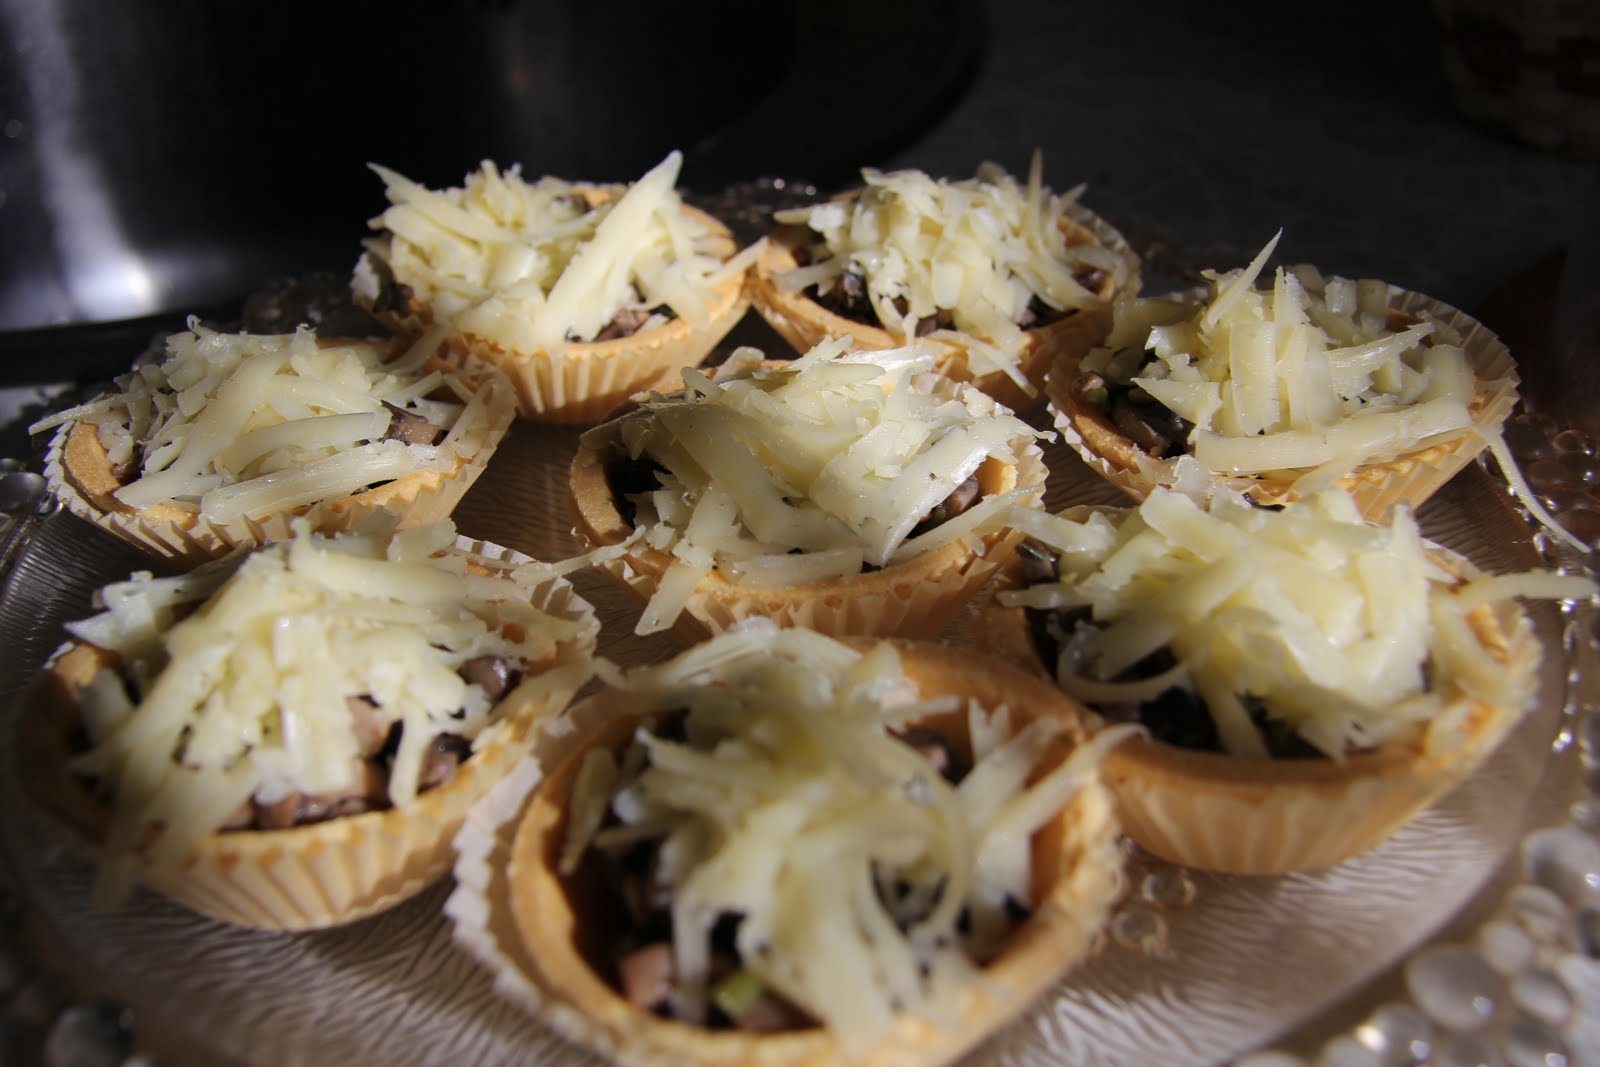 Tartlets with mushrooms and carrots